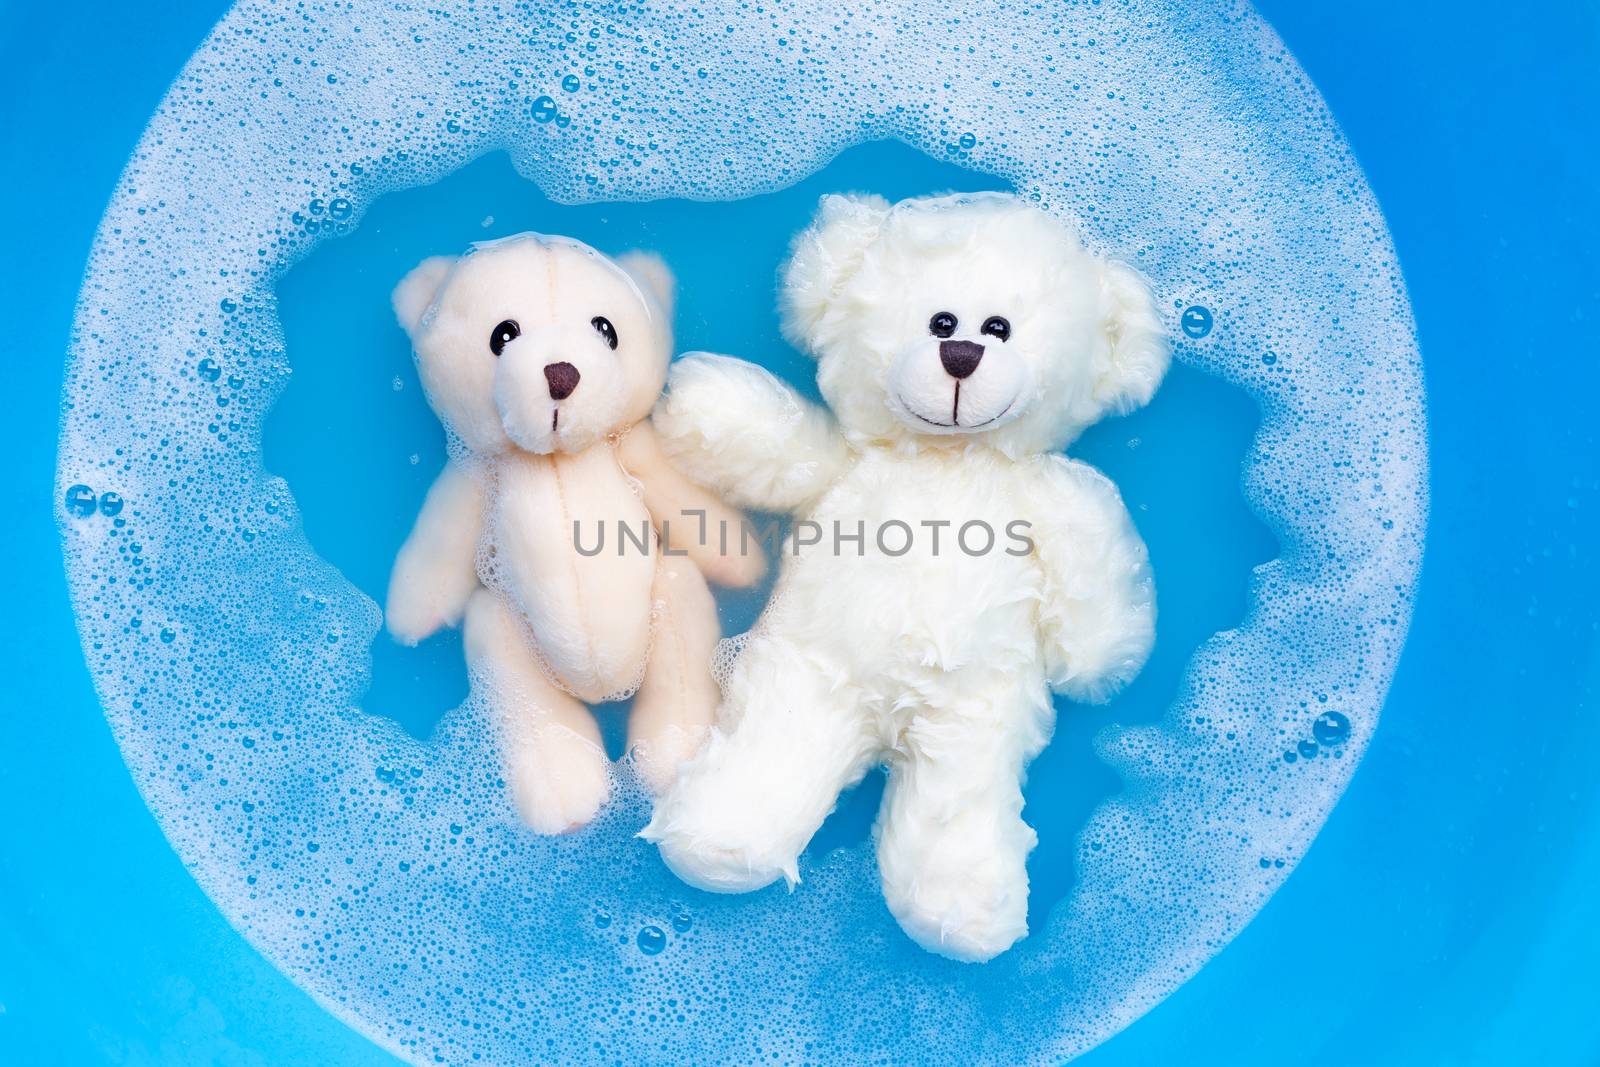 Soak  two toy bears in laundry detergent water dissolution befor by Bowonpat